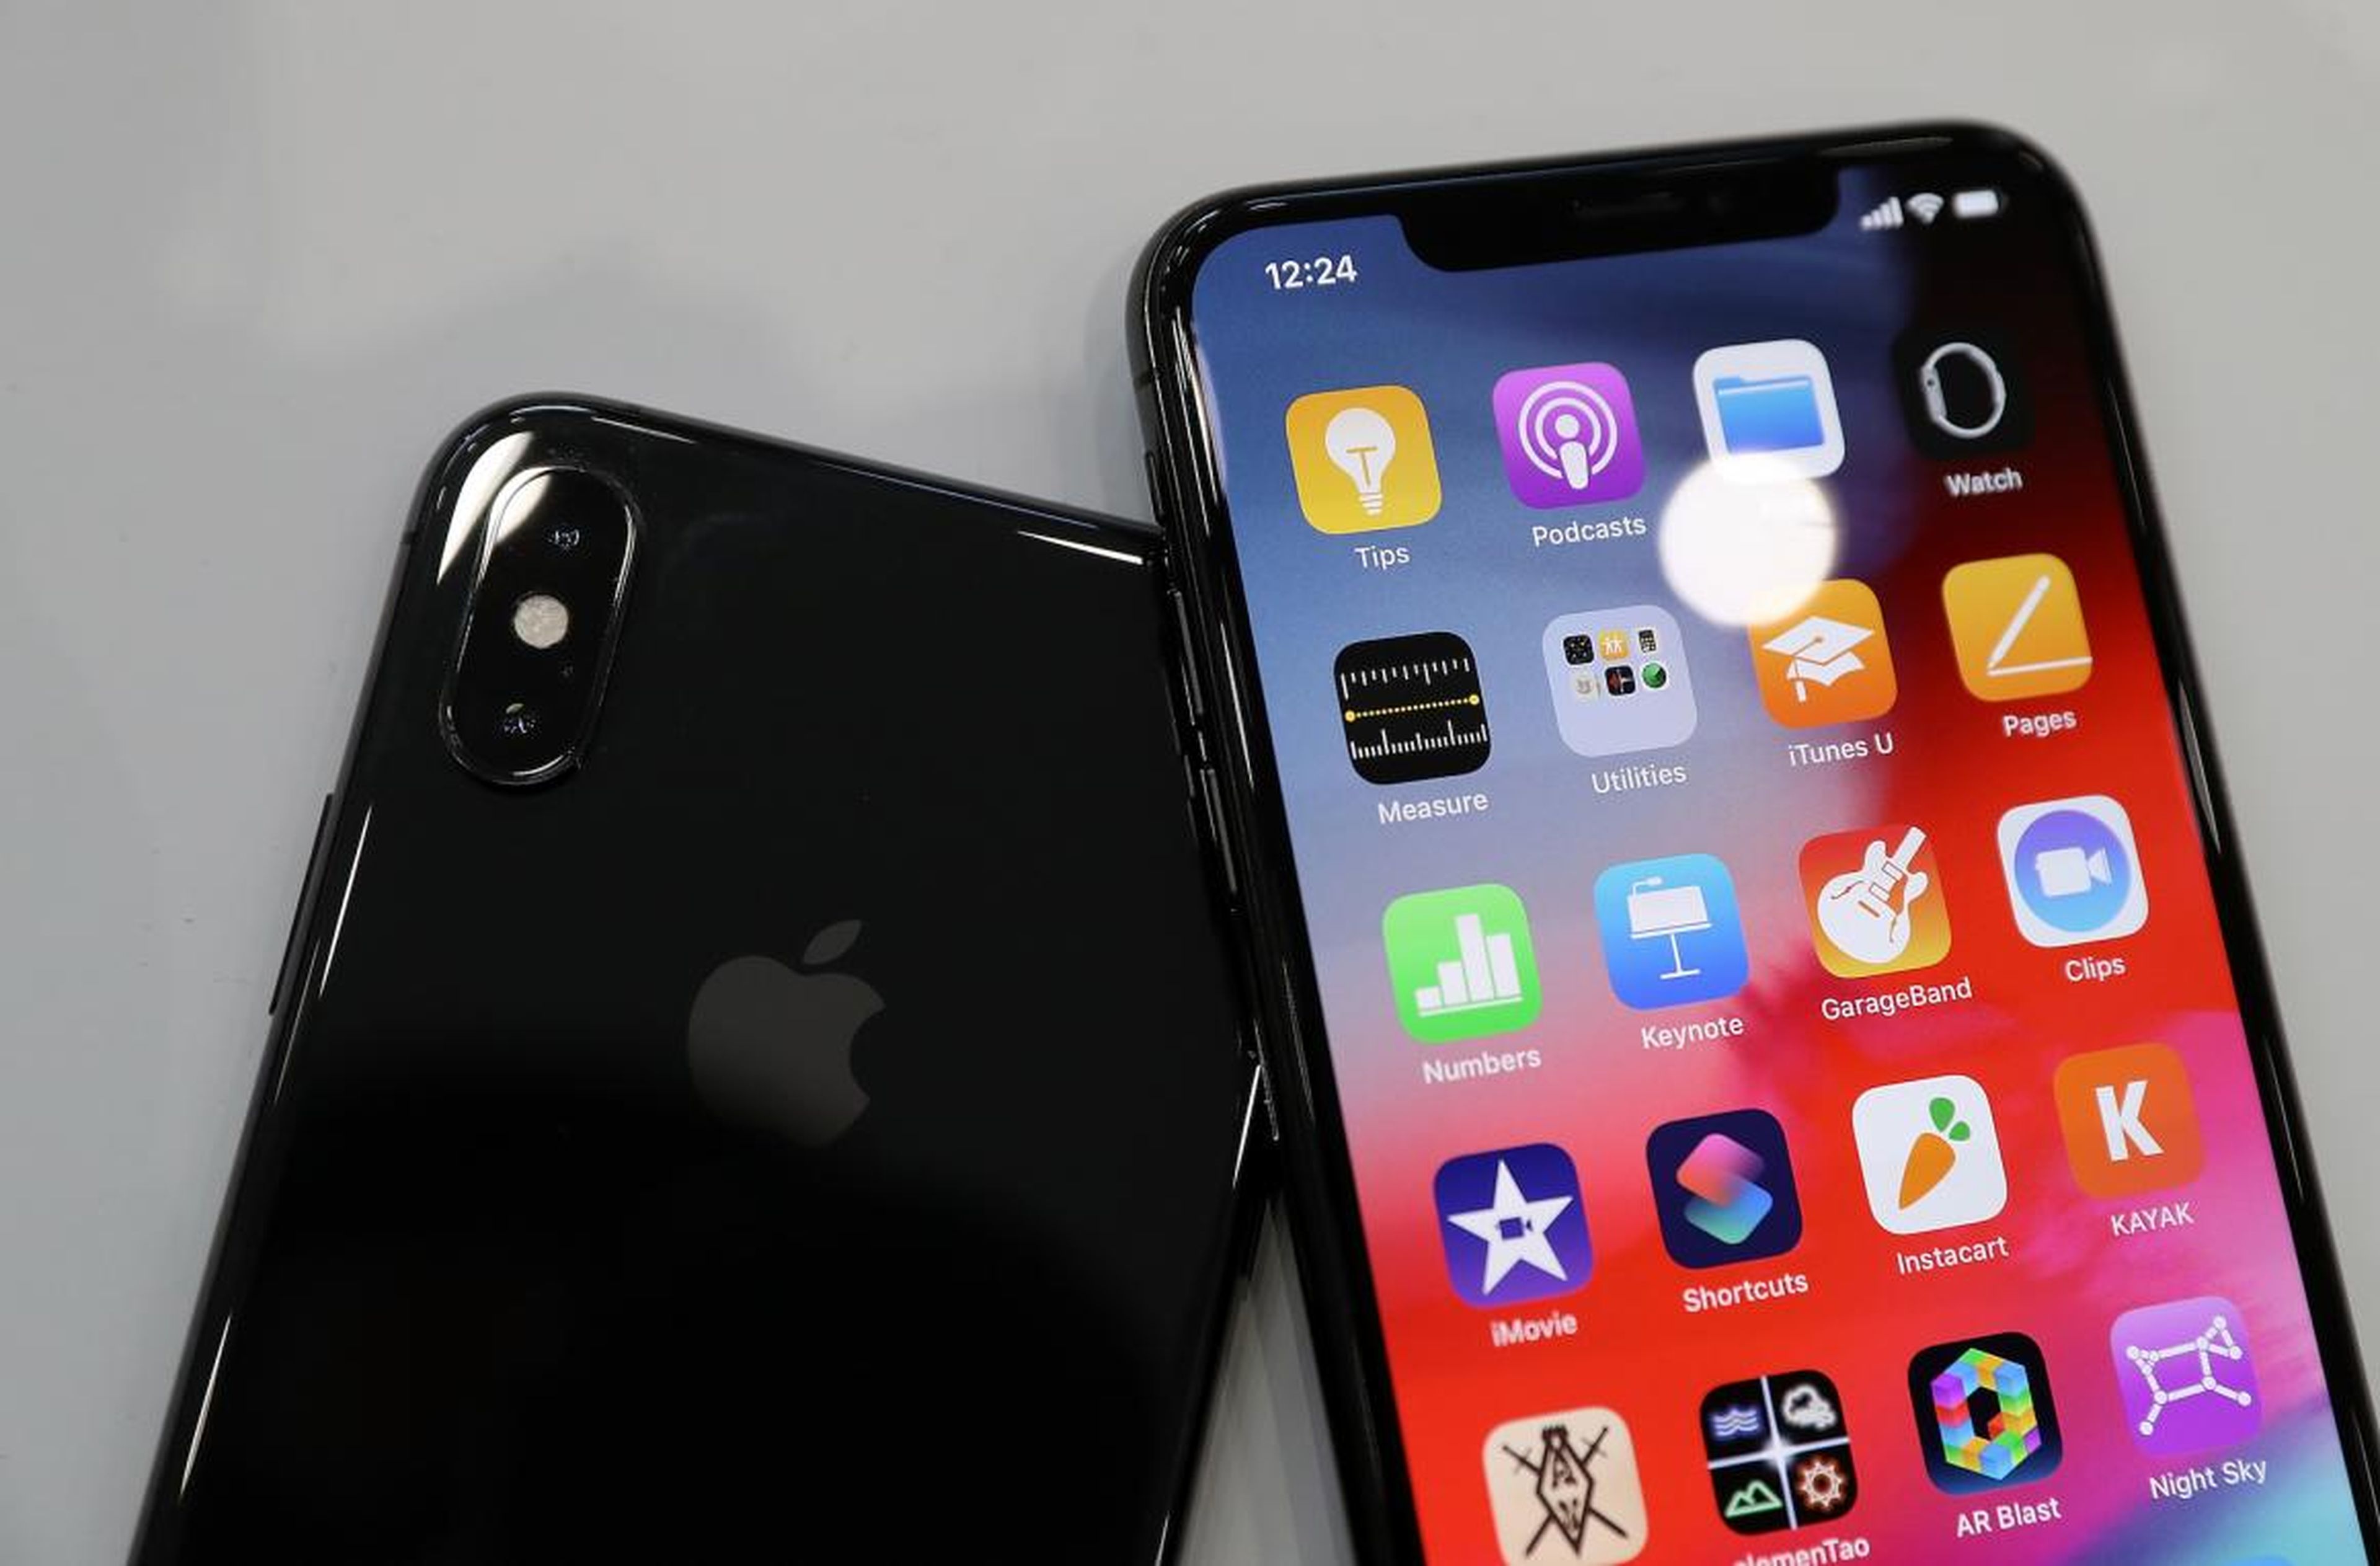 Apple is widely expected to debut three new iPhones in 2019.